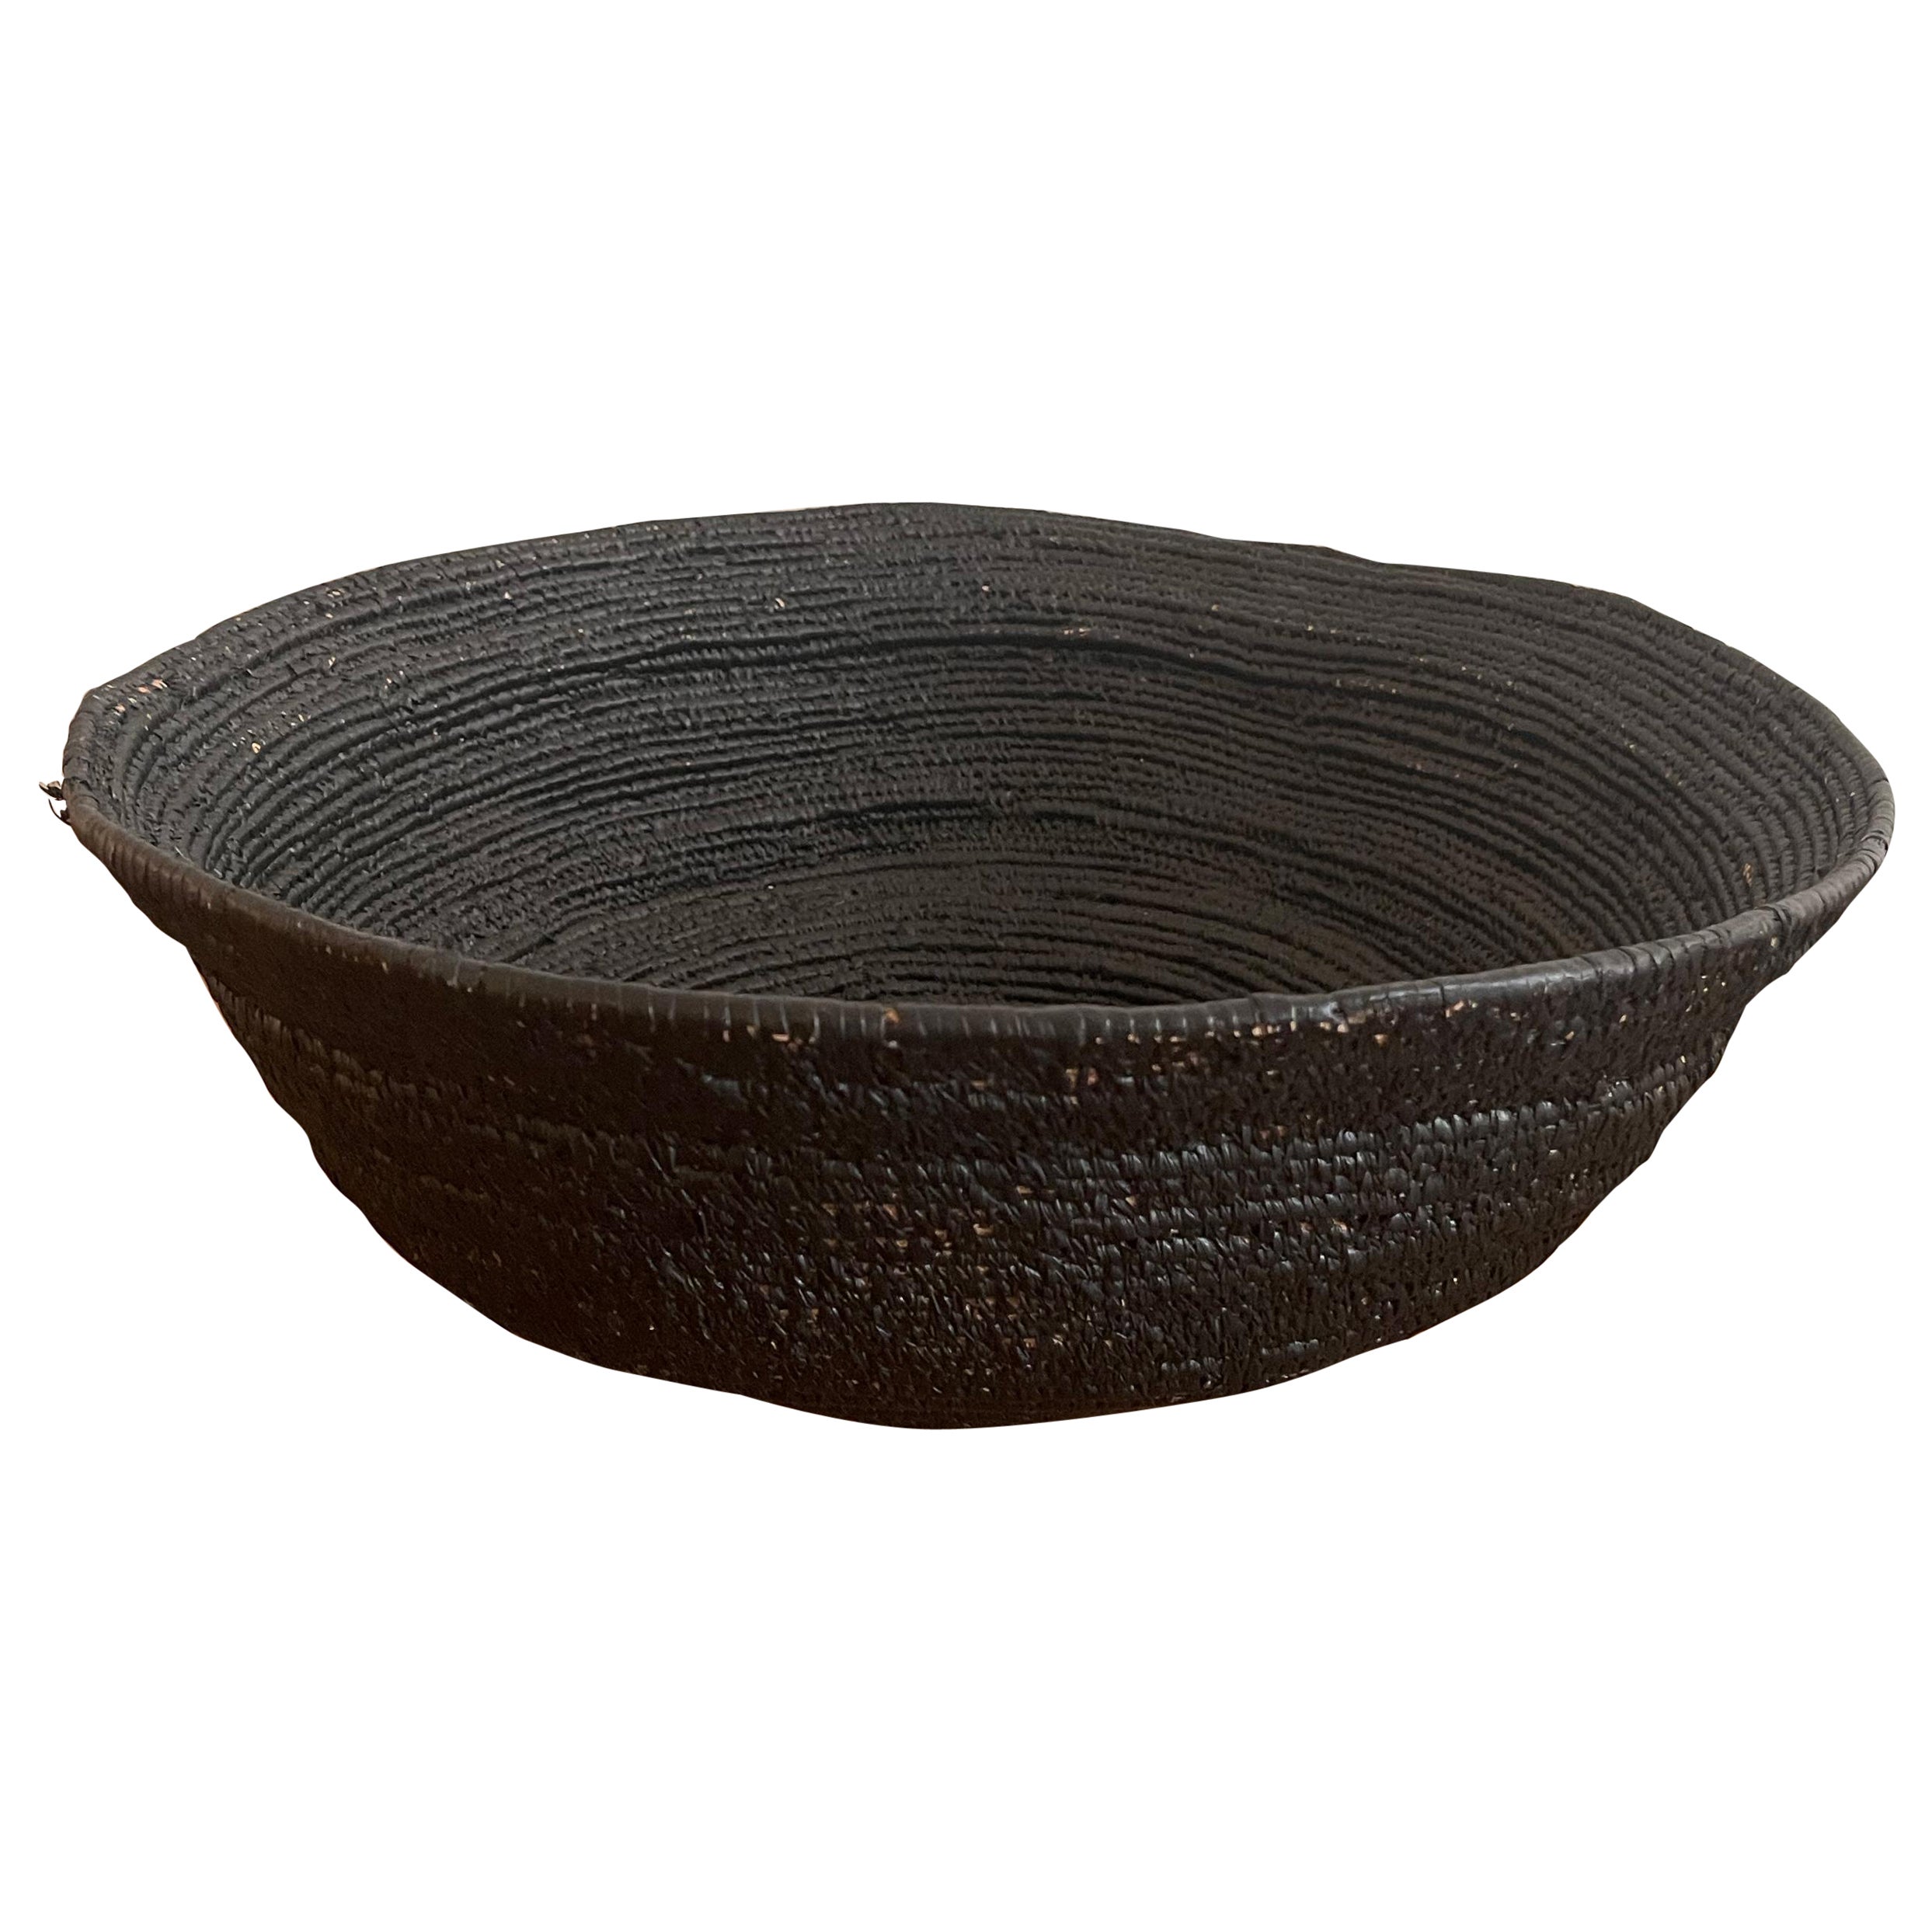 Charcoal Seagrass Woven Basket For Sale